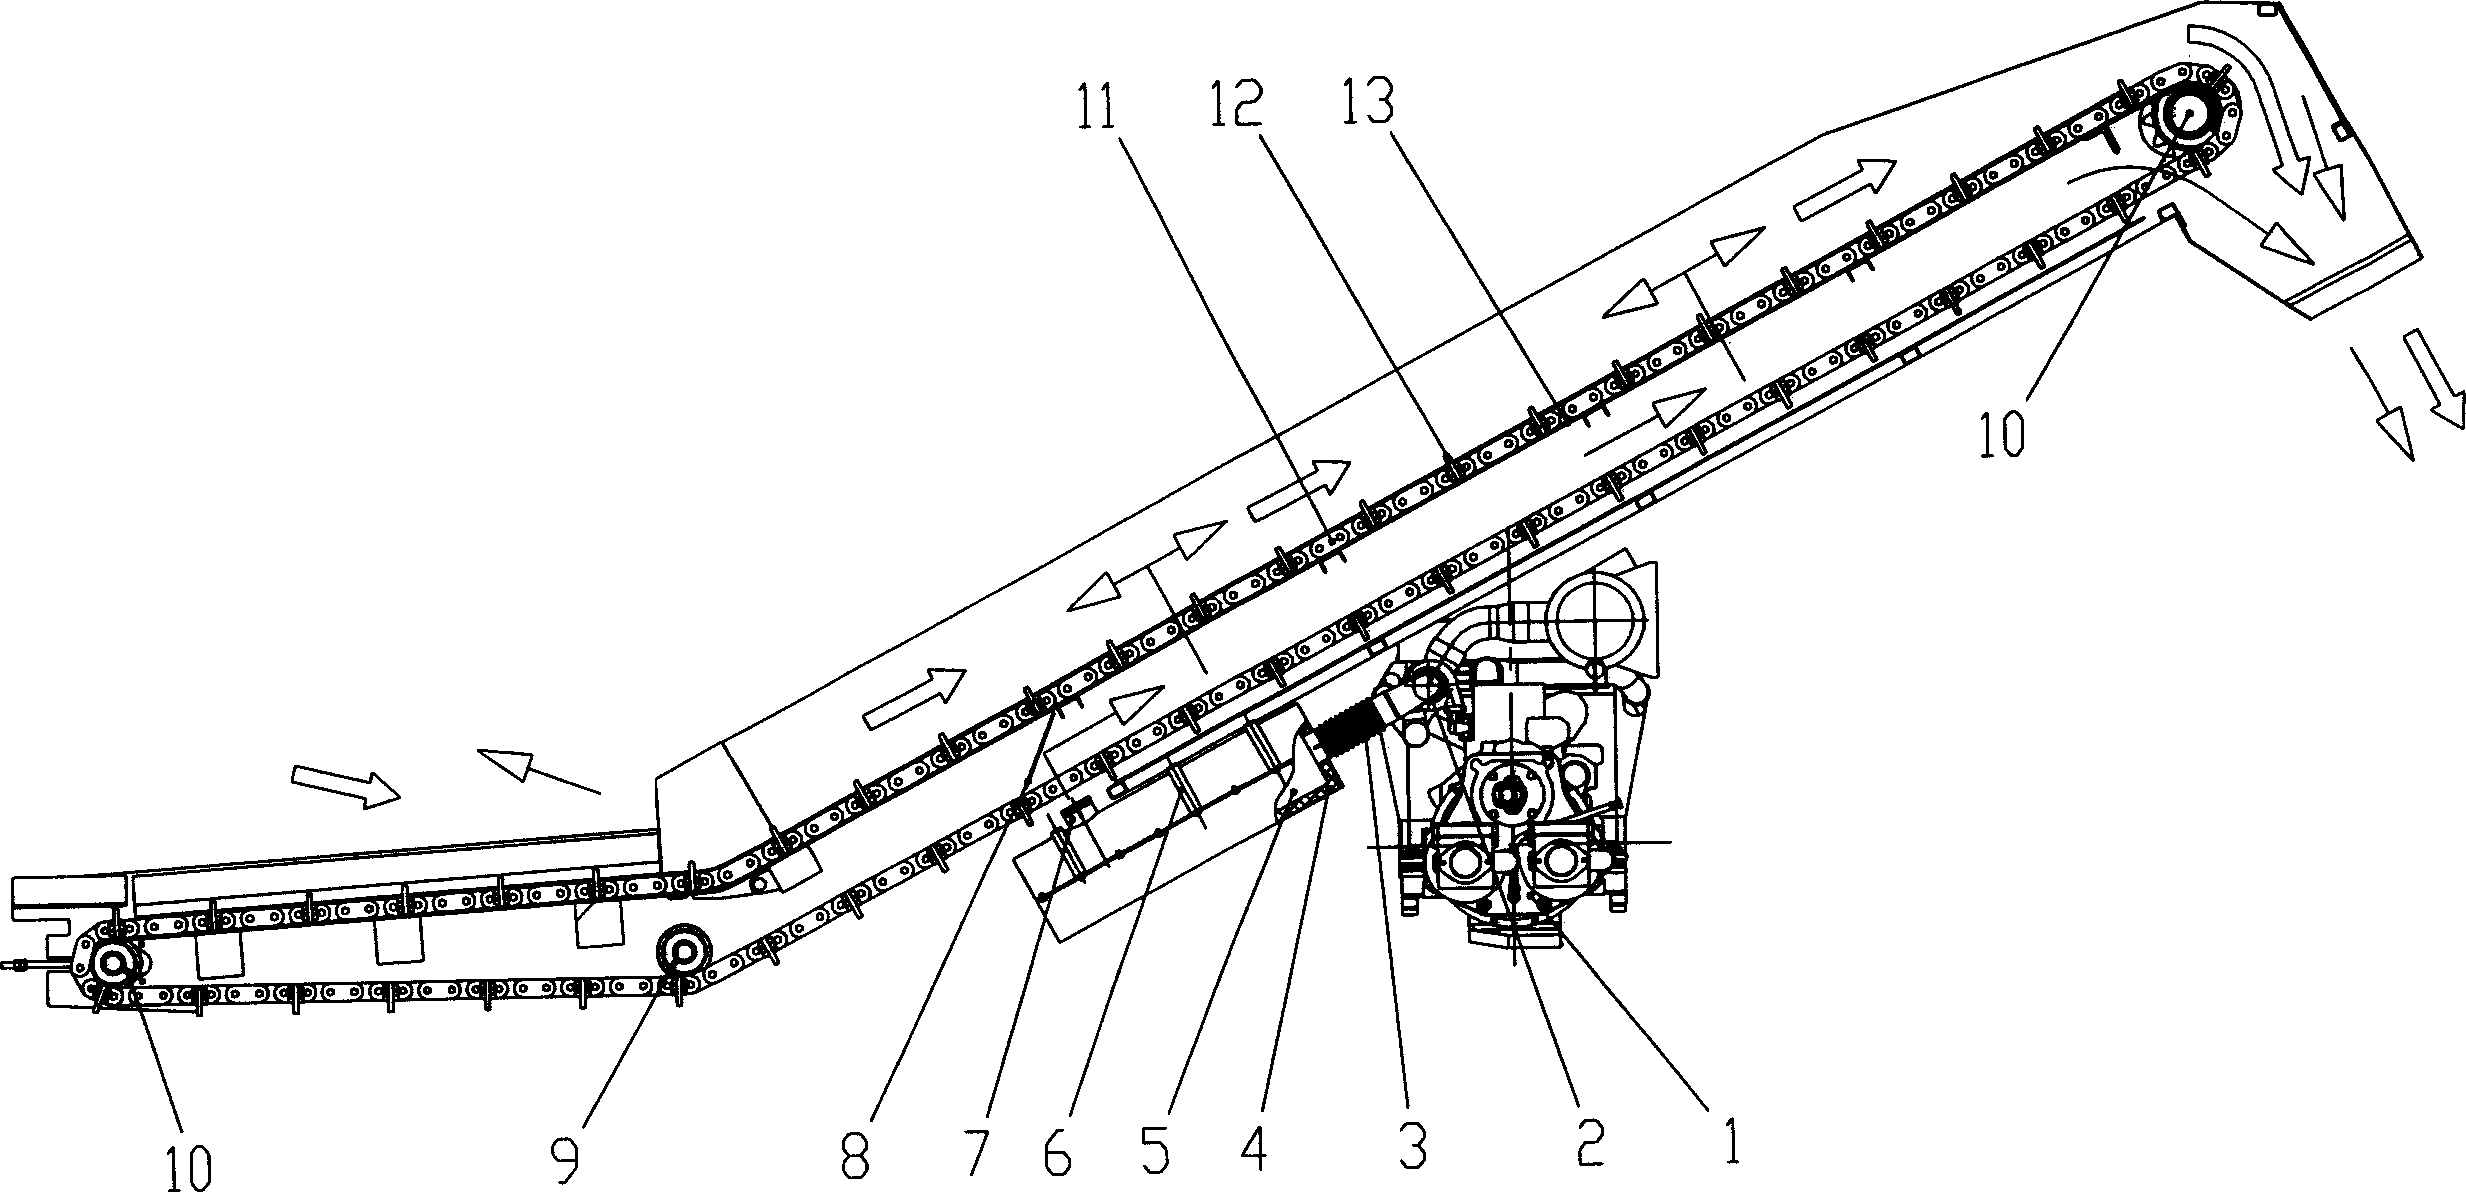 Asphalt concrete material conveying device and method for heating asphalt concrete material